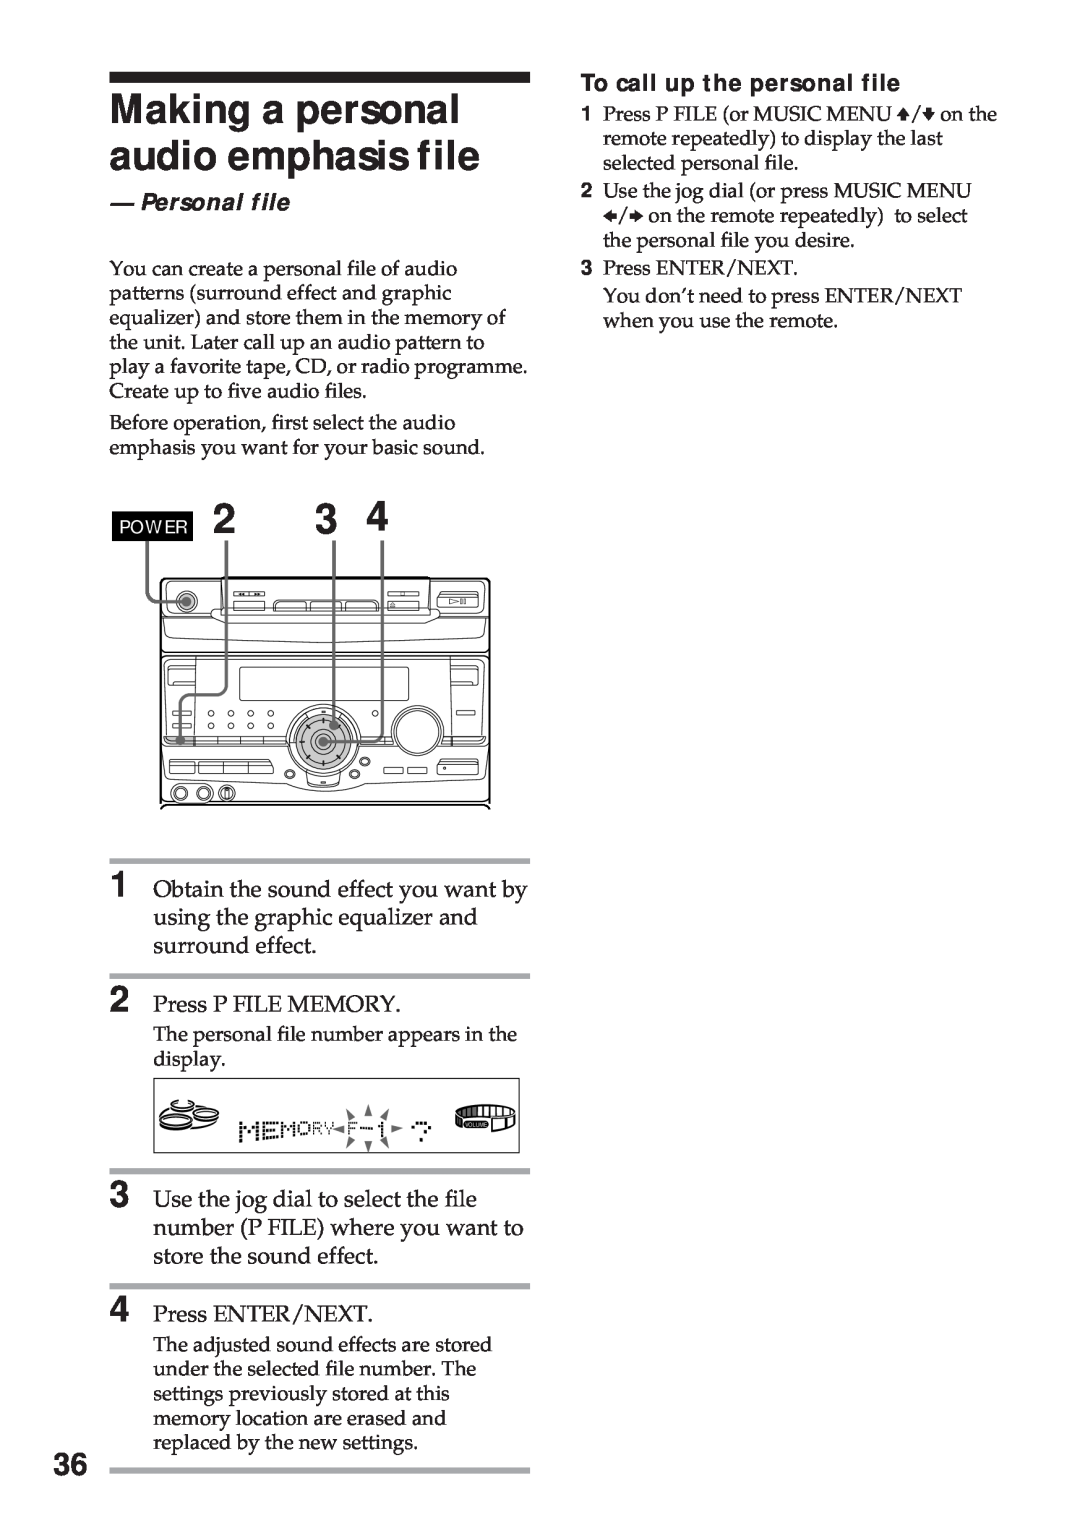 Sony MHC-RX100AV operating instructions Making a personal audio emphasis file, Personal file, To call up the personal file 